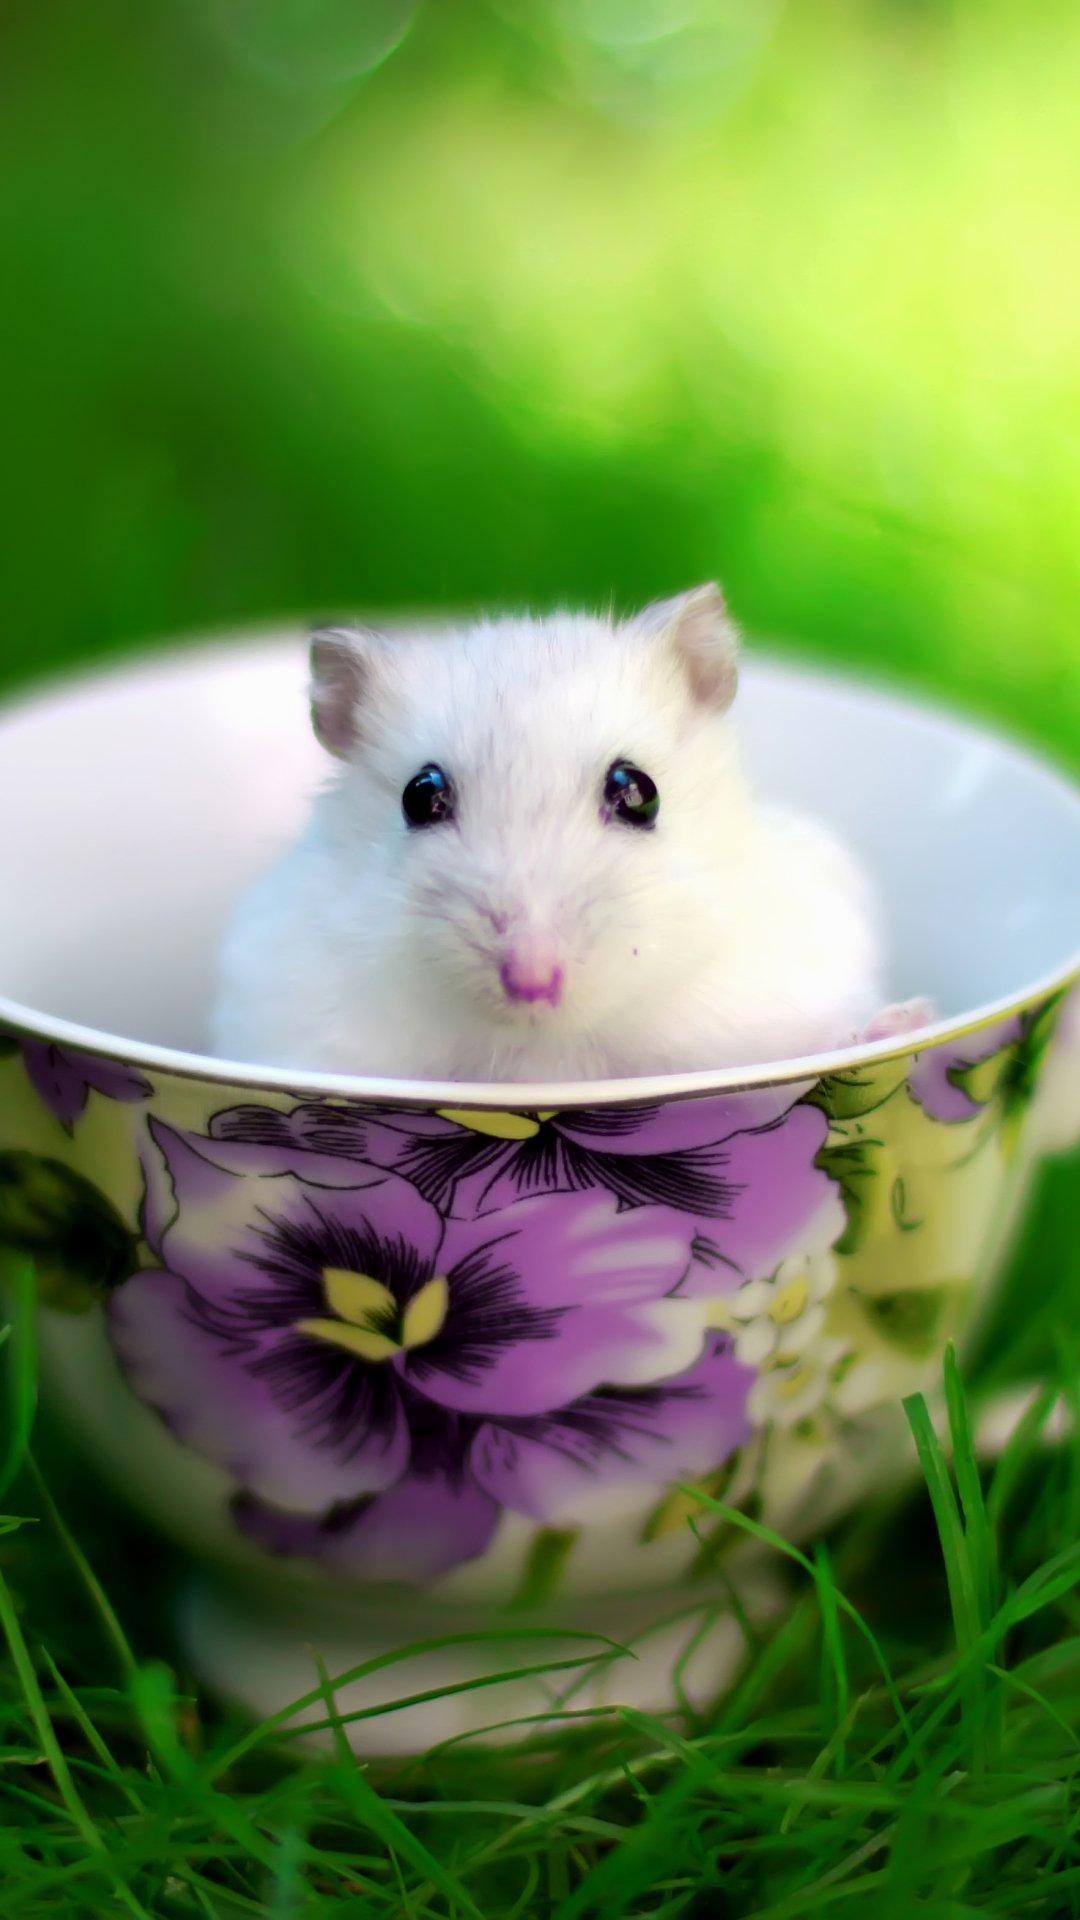 1080x1920 Android phone wallpaper cute  cute_white_mouse_in_cup-mobile